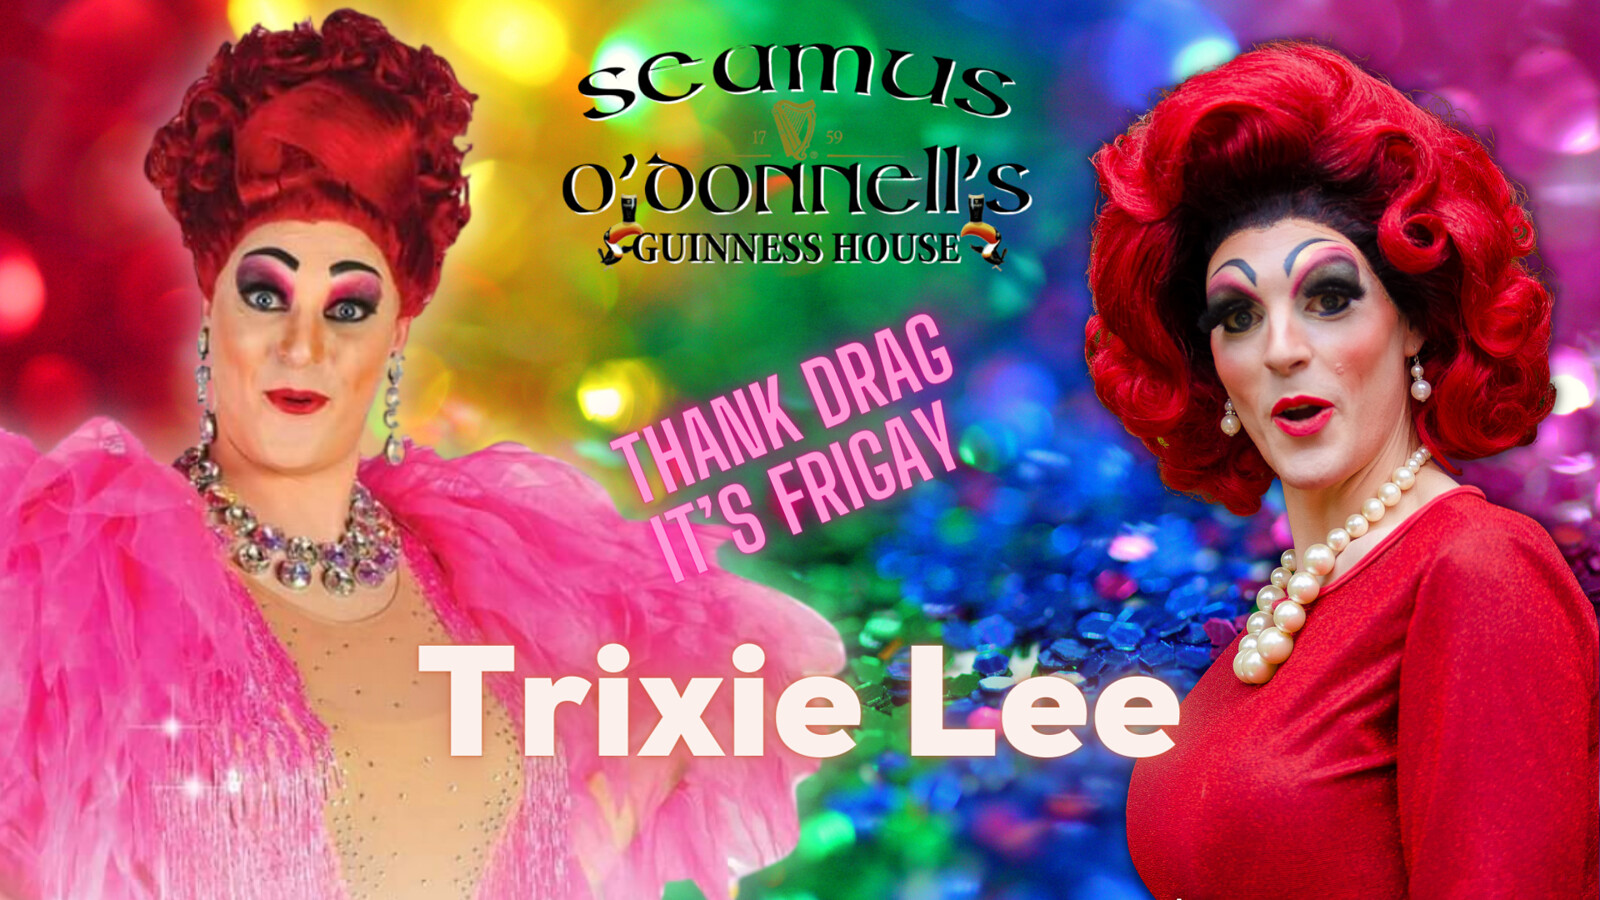 Thank Drag it's FriGay with Trixie Lee at Seamus O'Donnell's